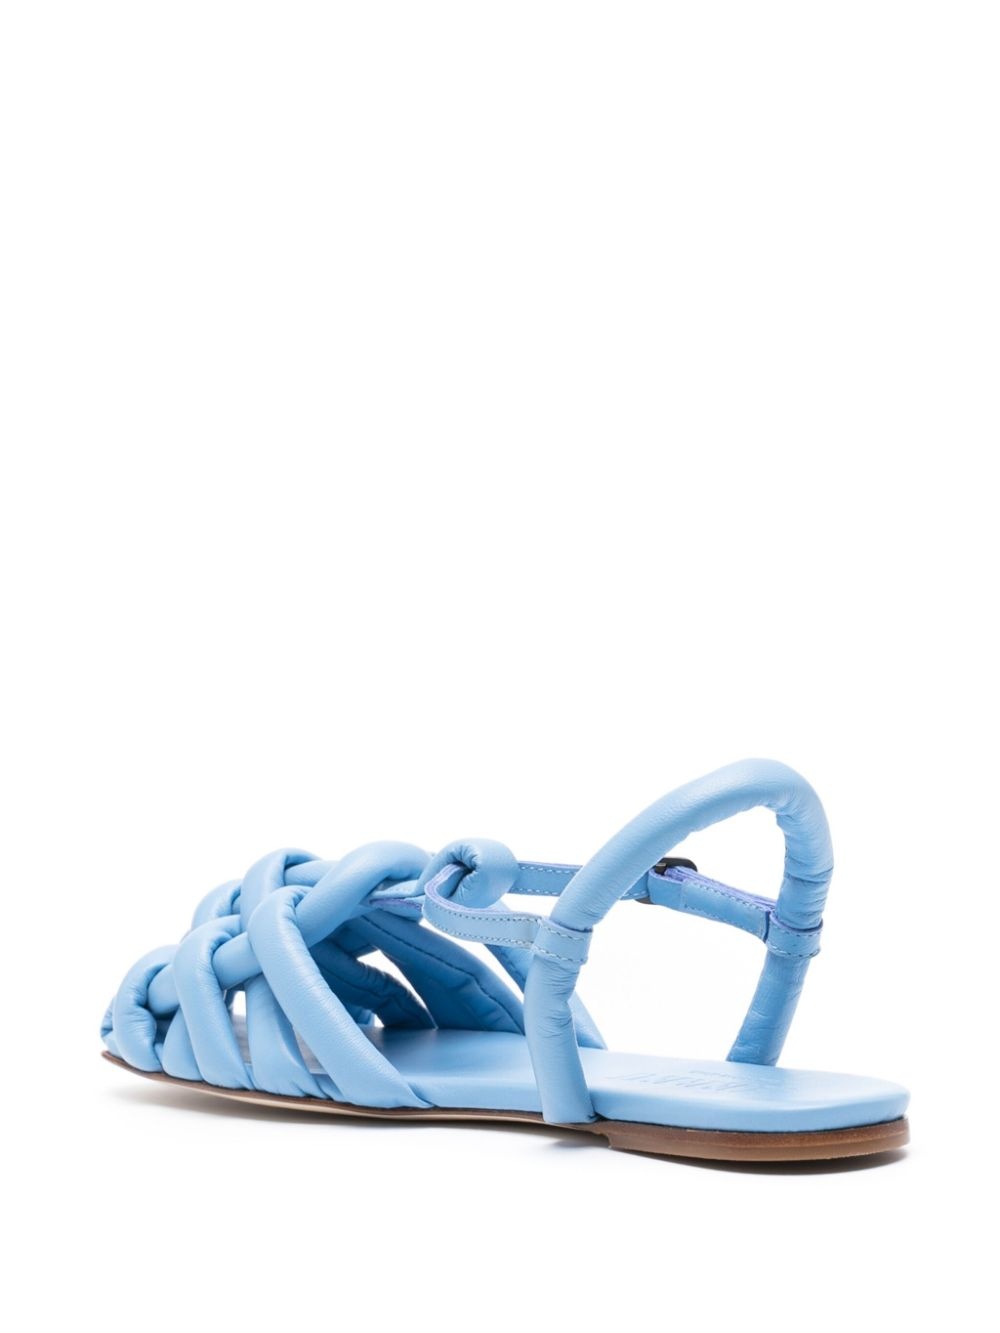 Cabersa padded leather sandals - 3